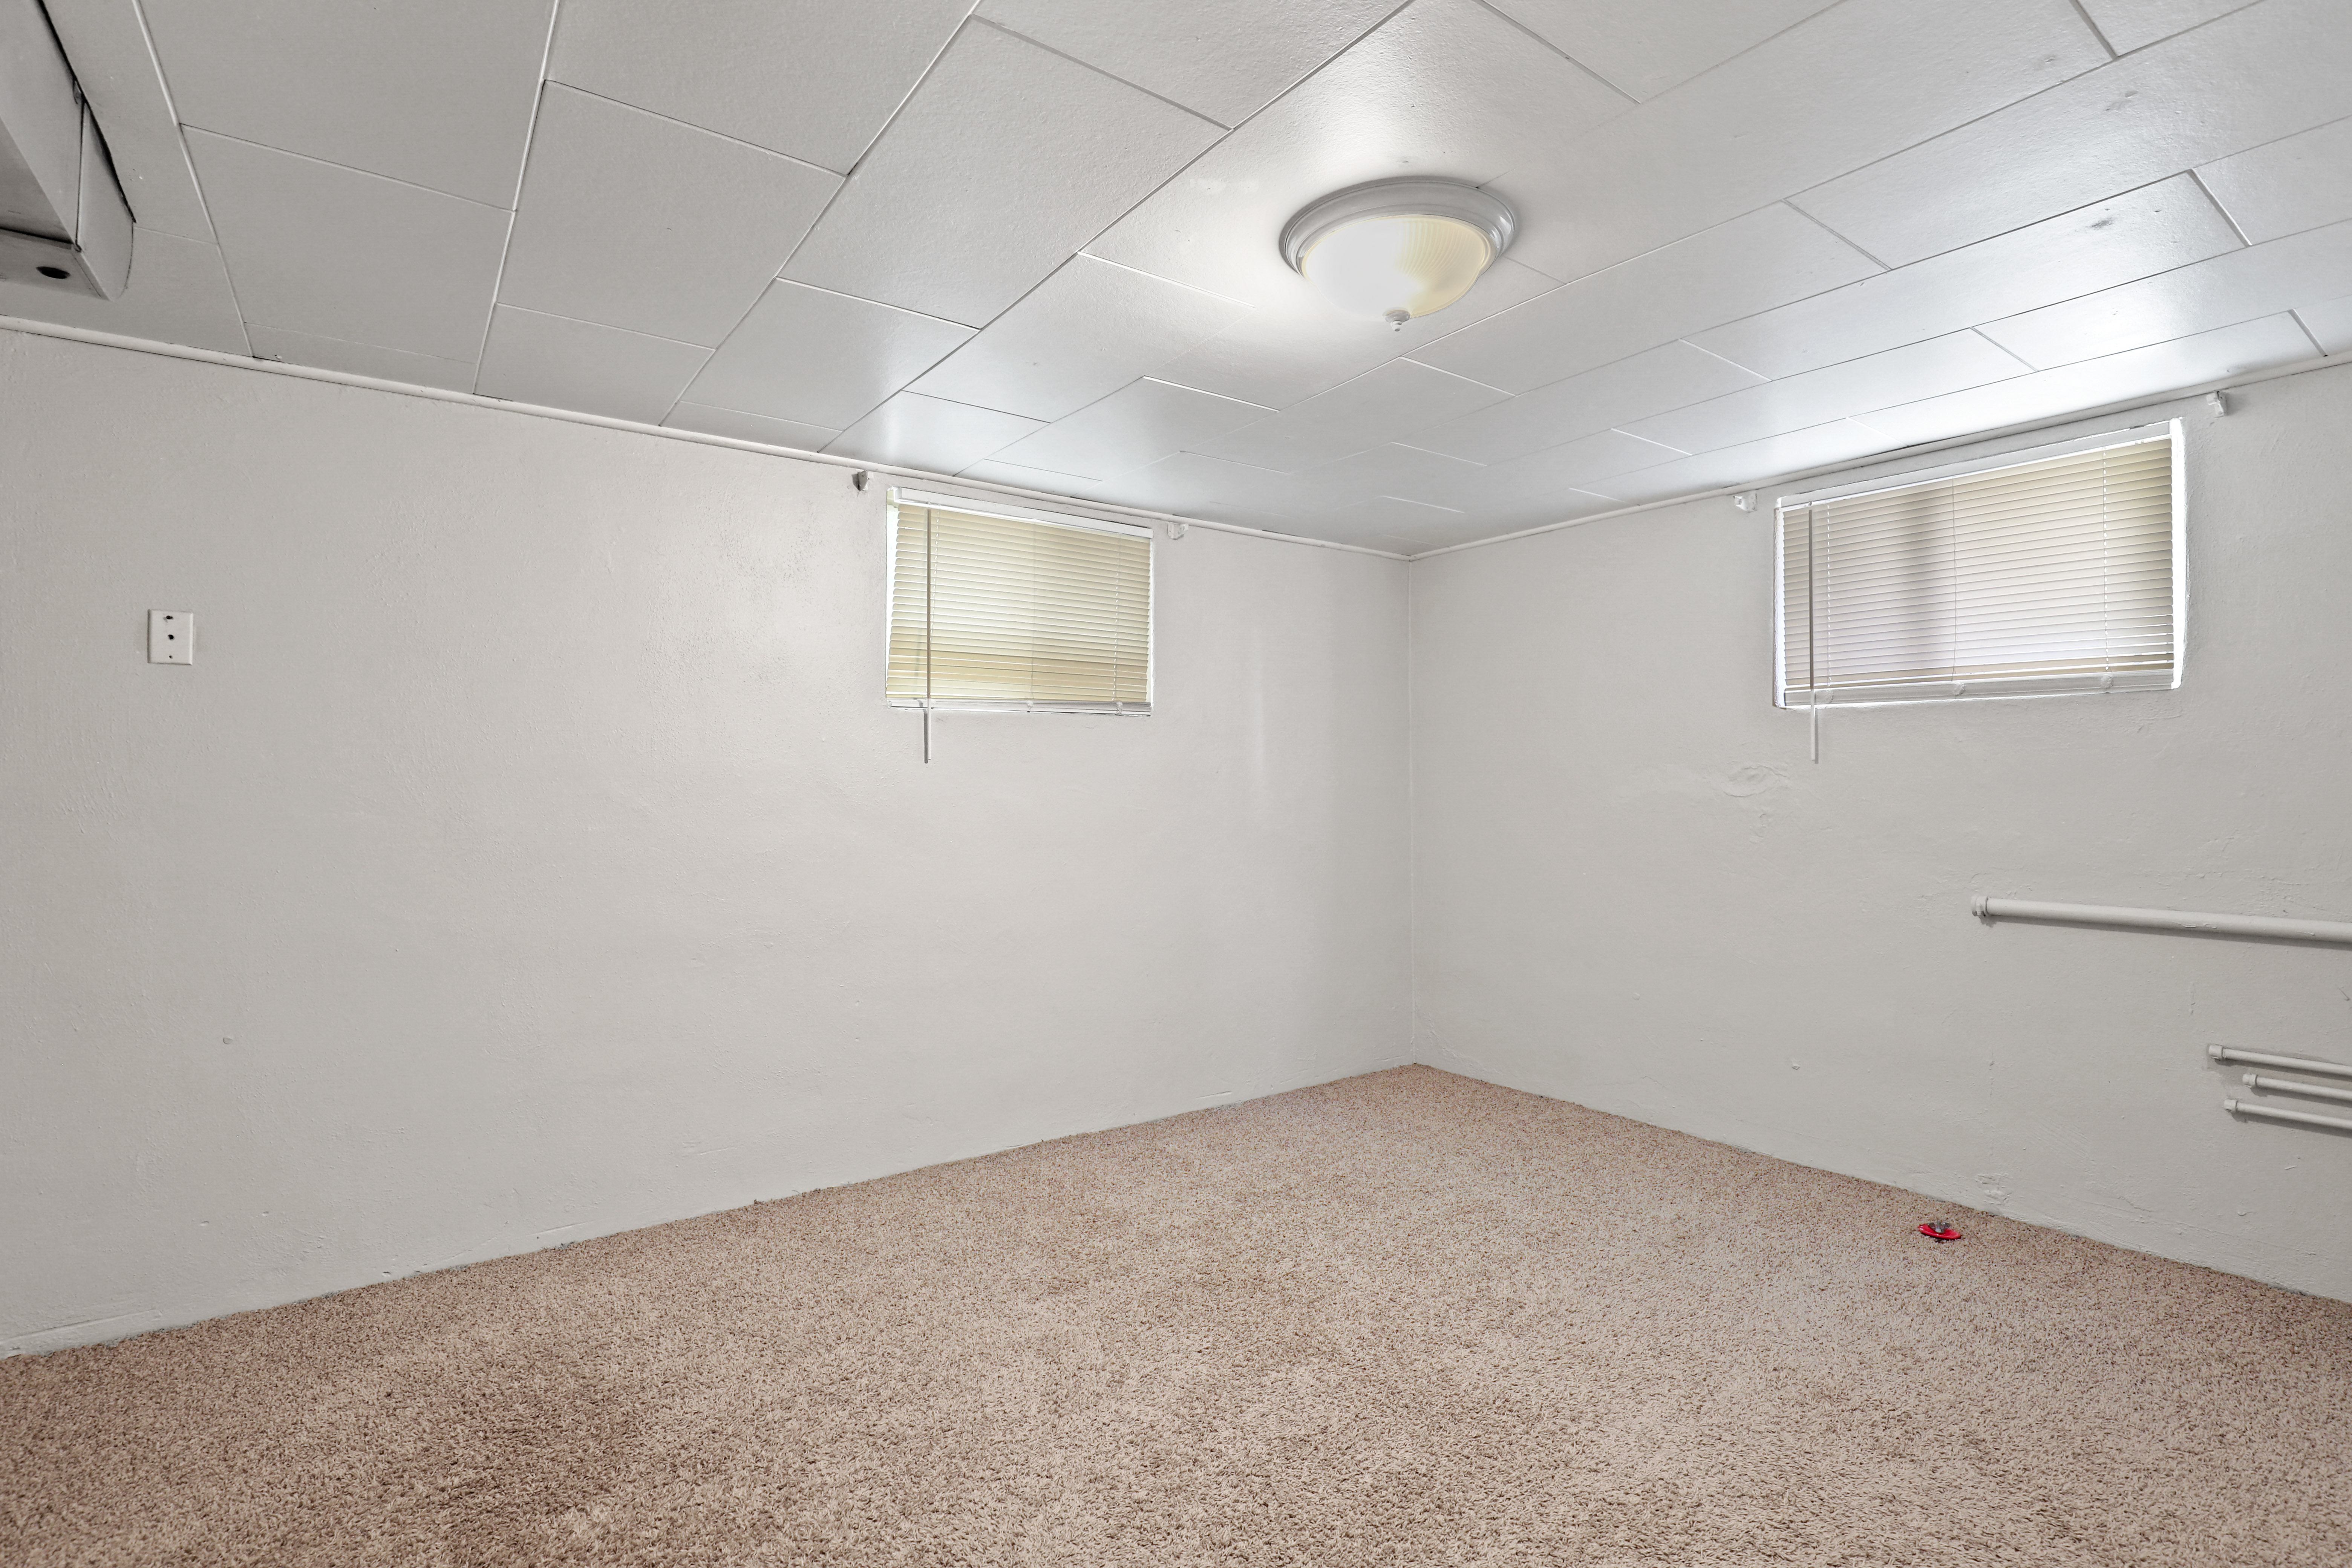 the interior of an empty room with carpet and two windows